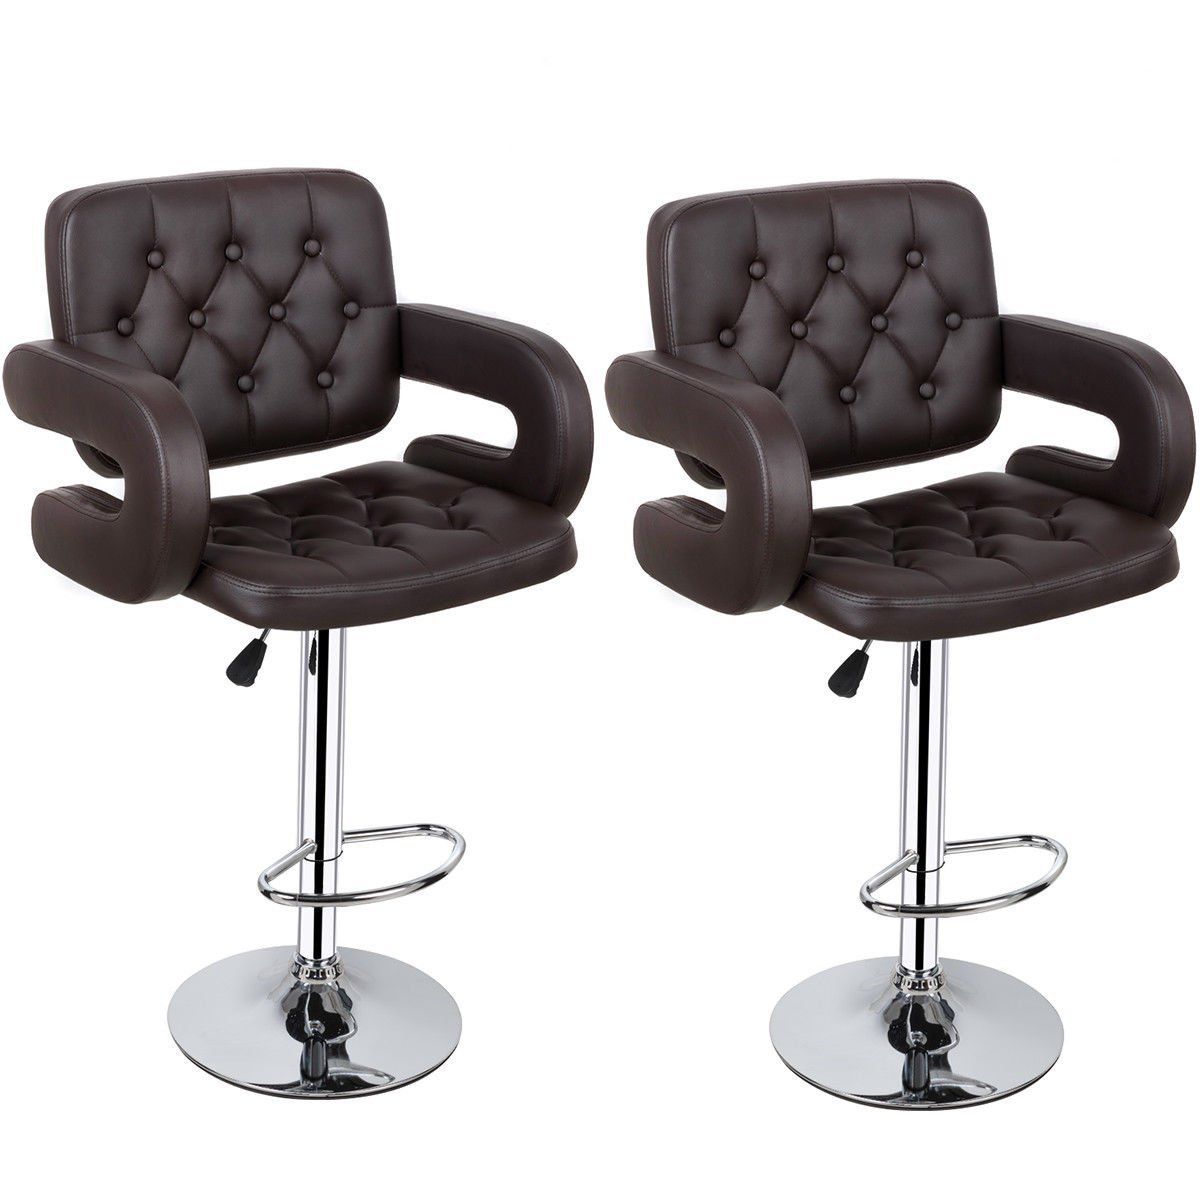 Bar Stools / Kitchen Breakfast Chairs - Set of Two - Brown Colour | Buy ...